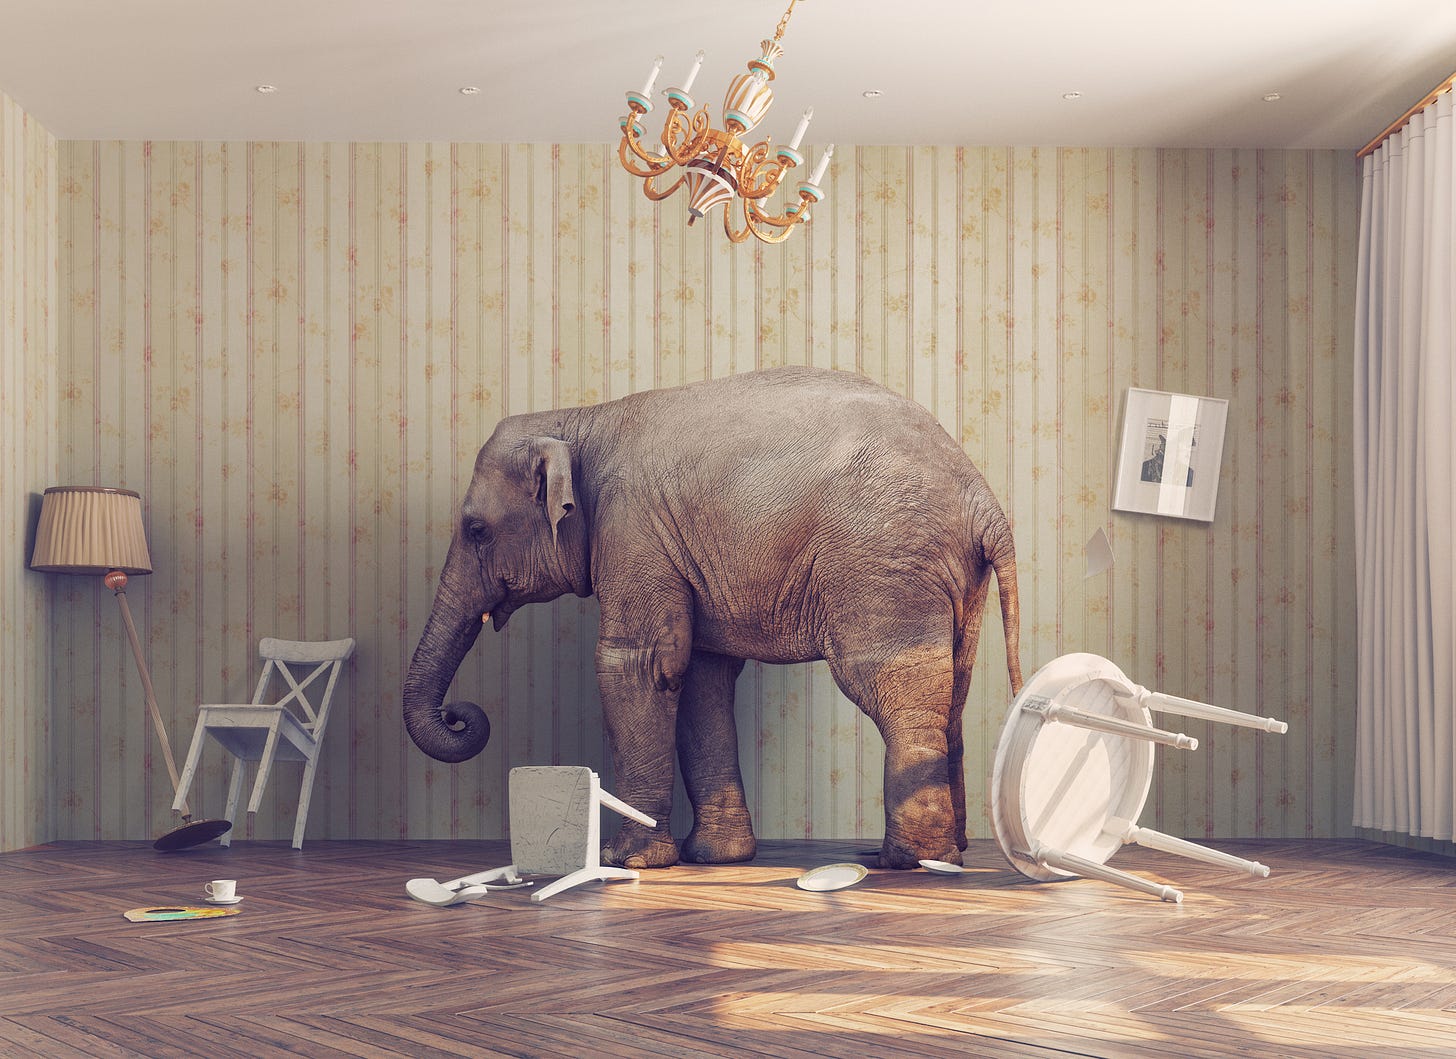 How to Safely Remove an Elephant From a Room - Elephant Capability